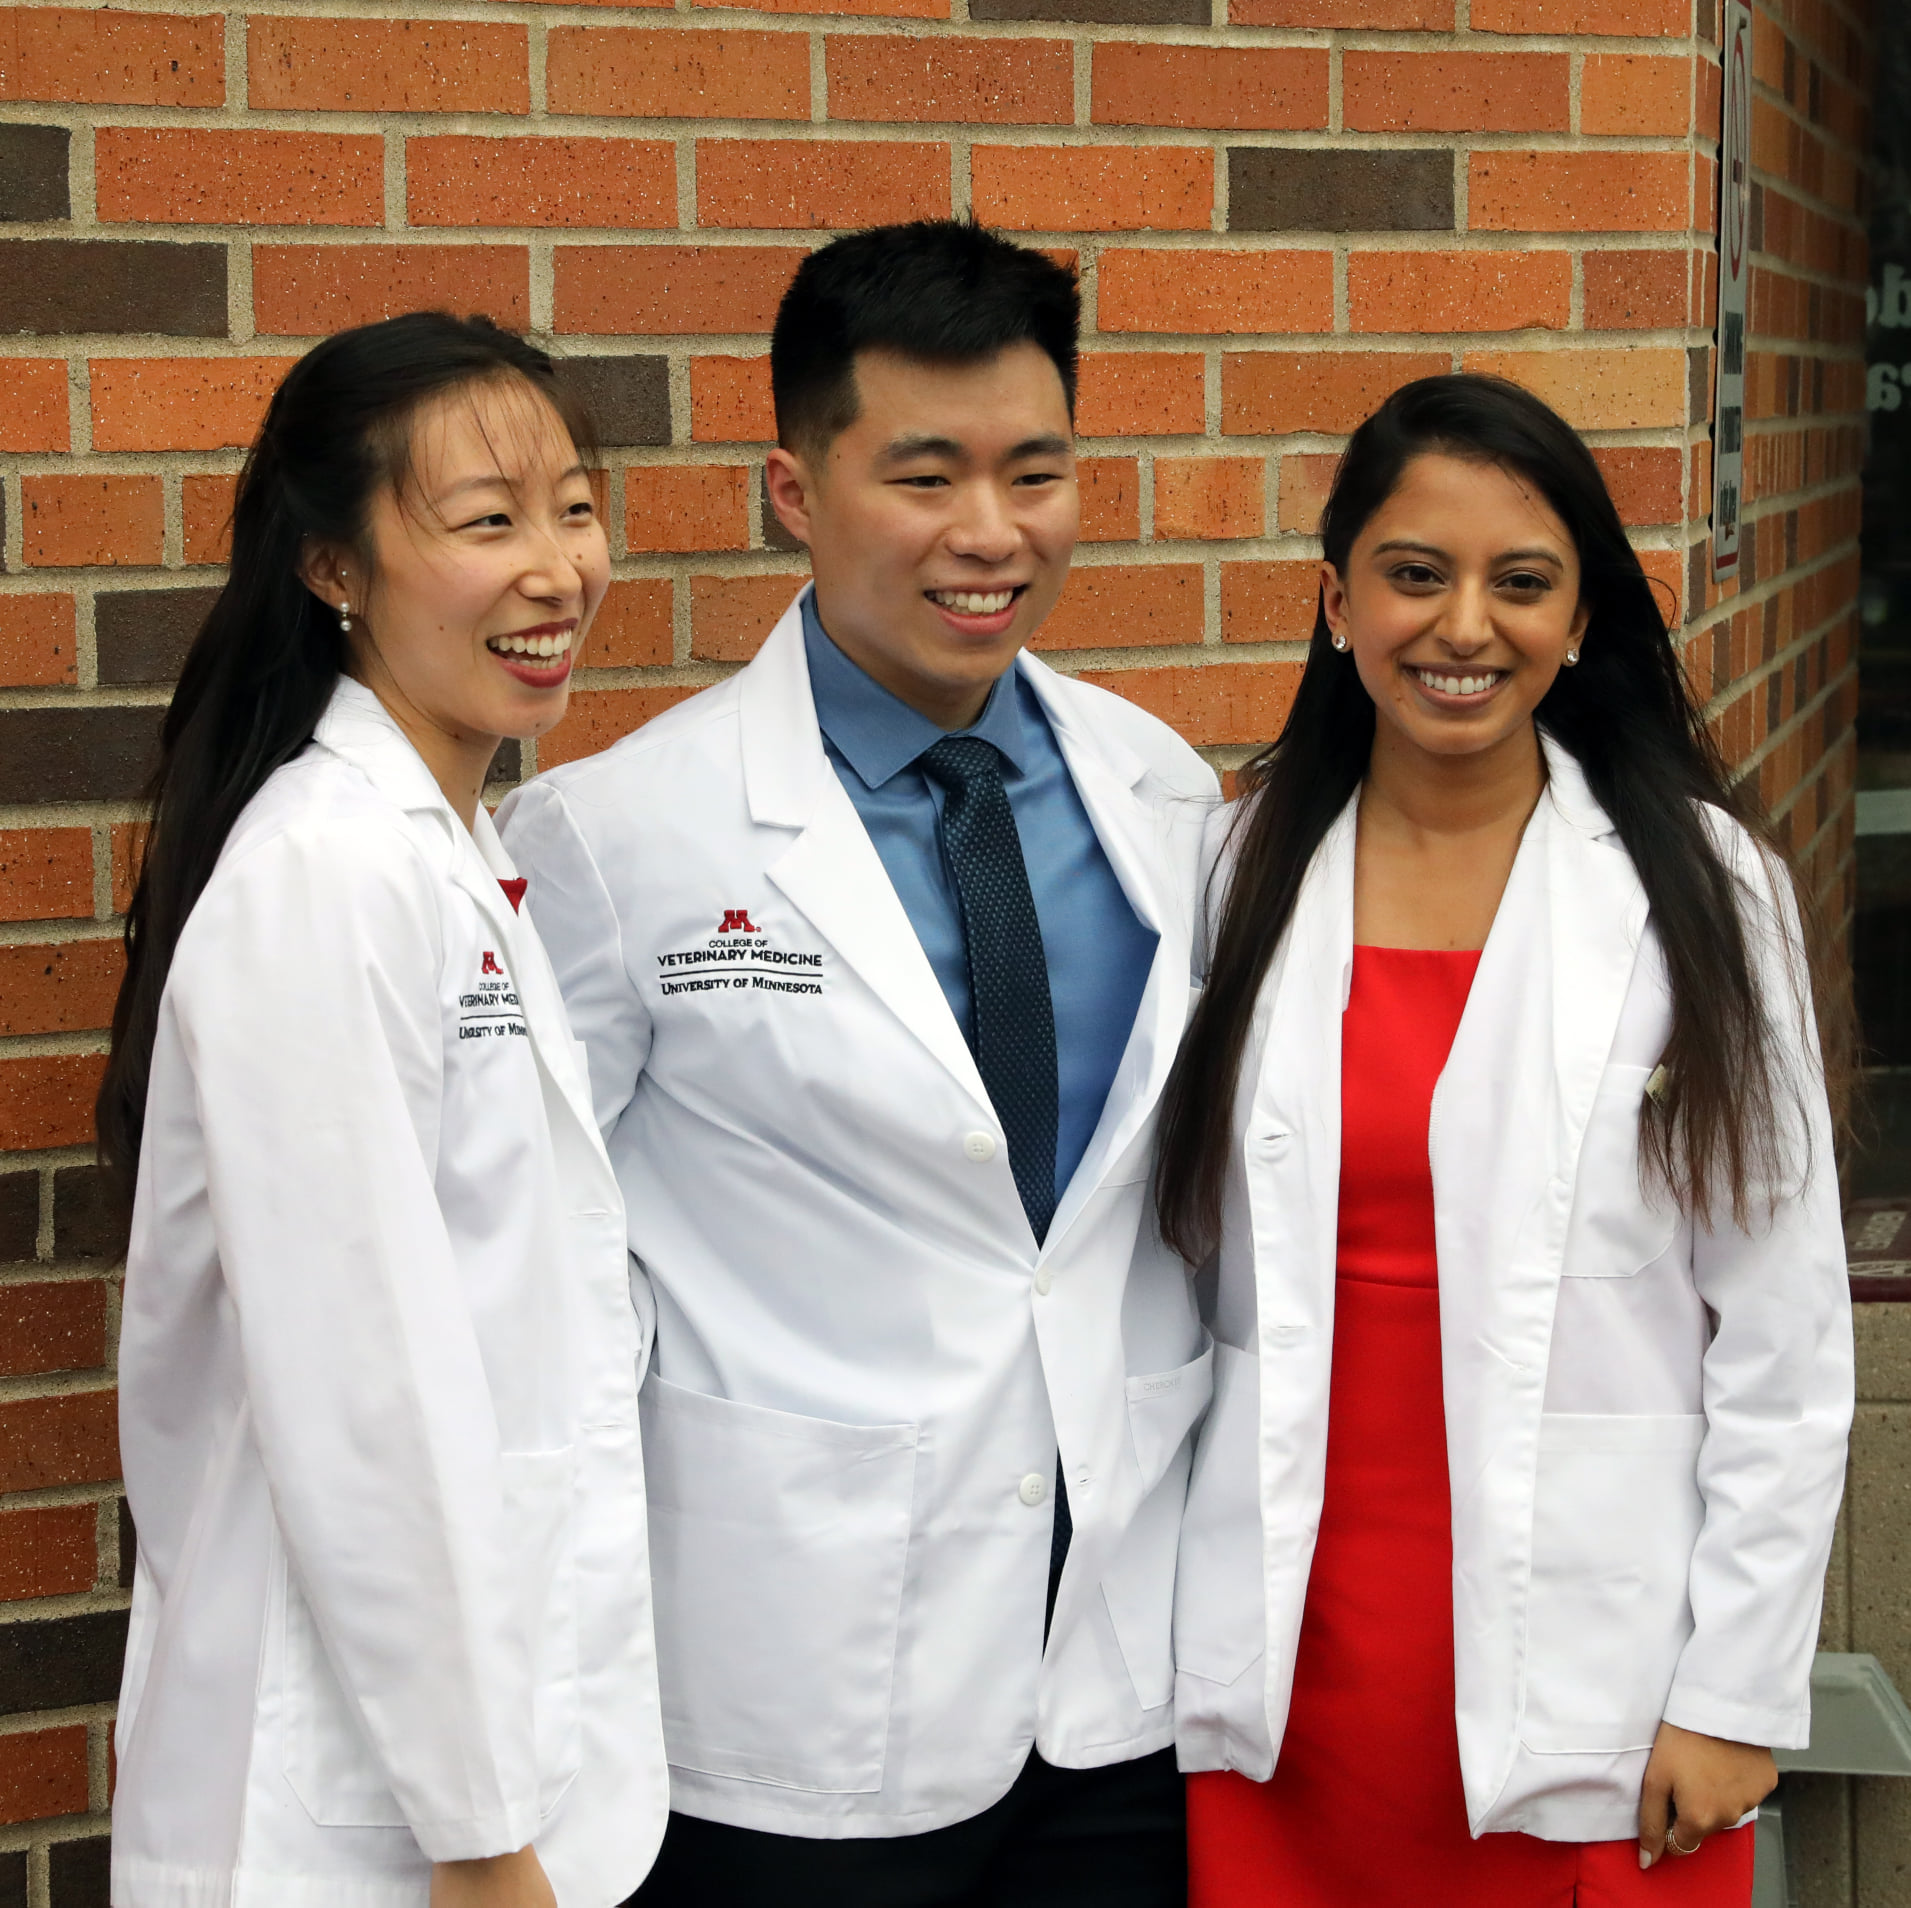 Whitecoat ceremony 2022 - students pose outside in front of brick wall